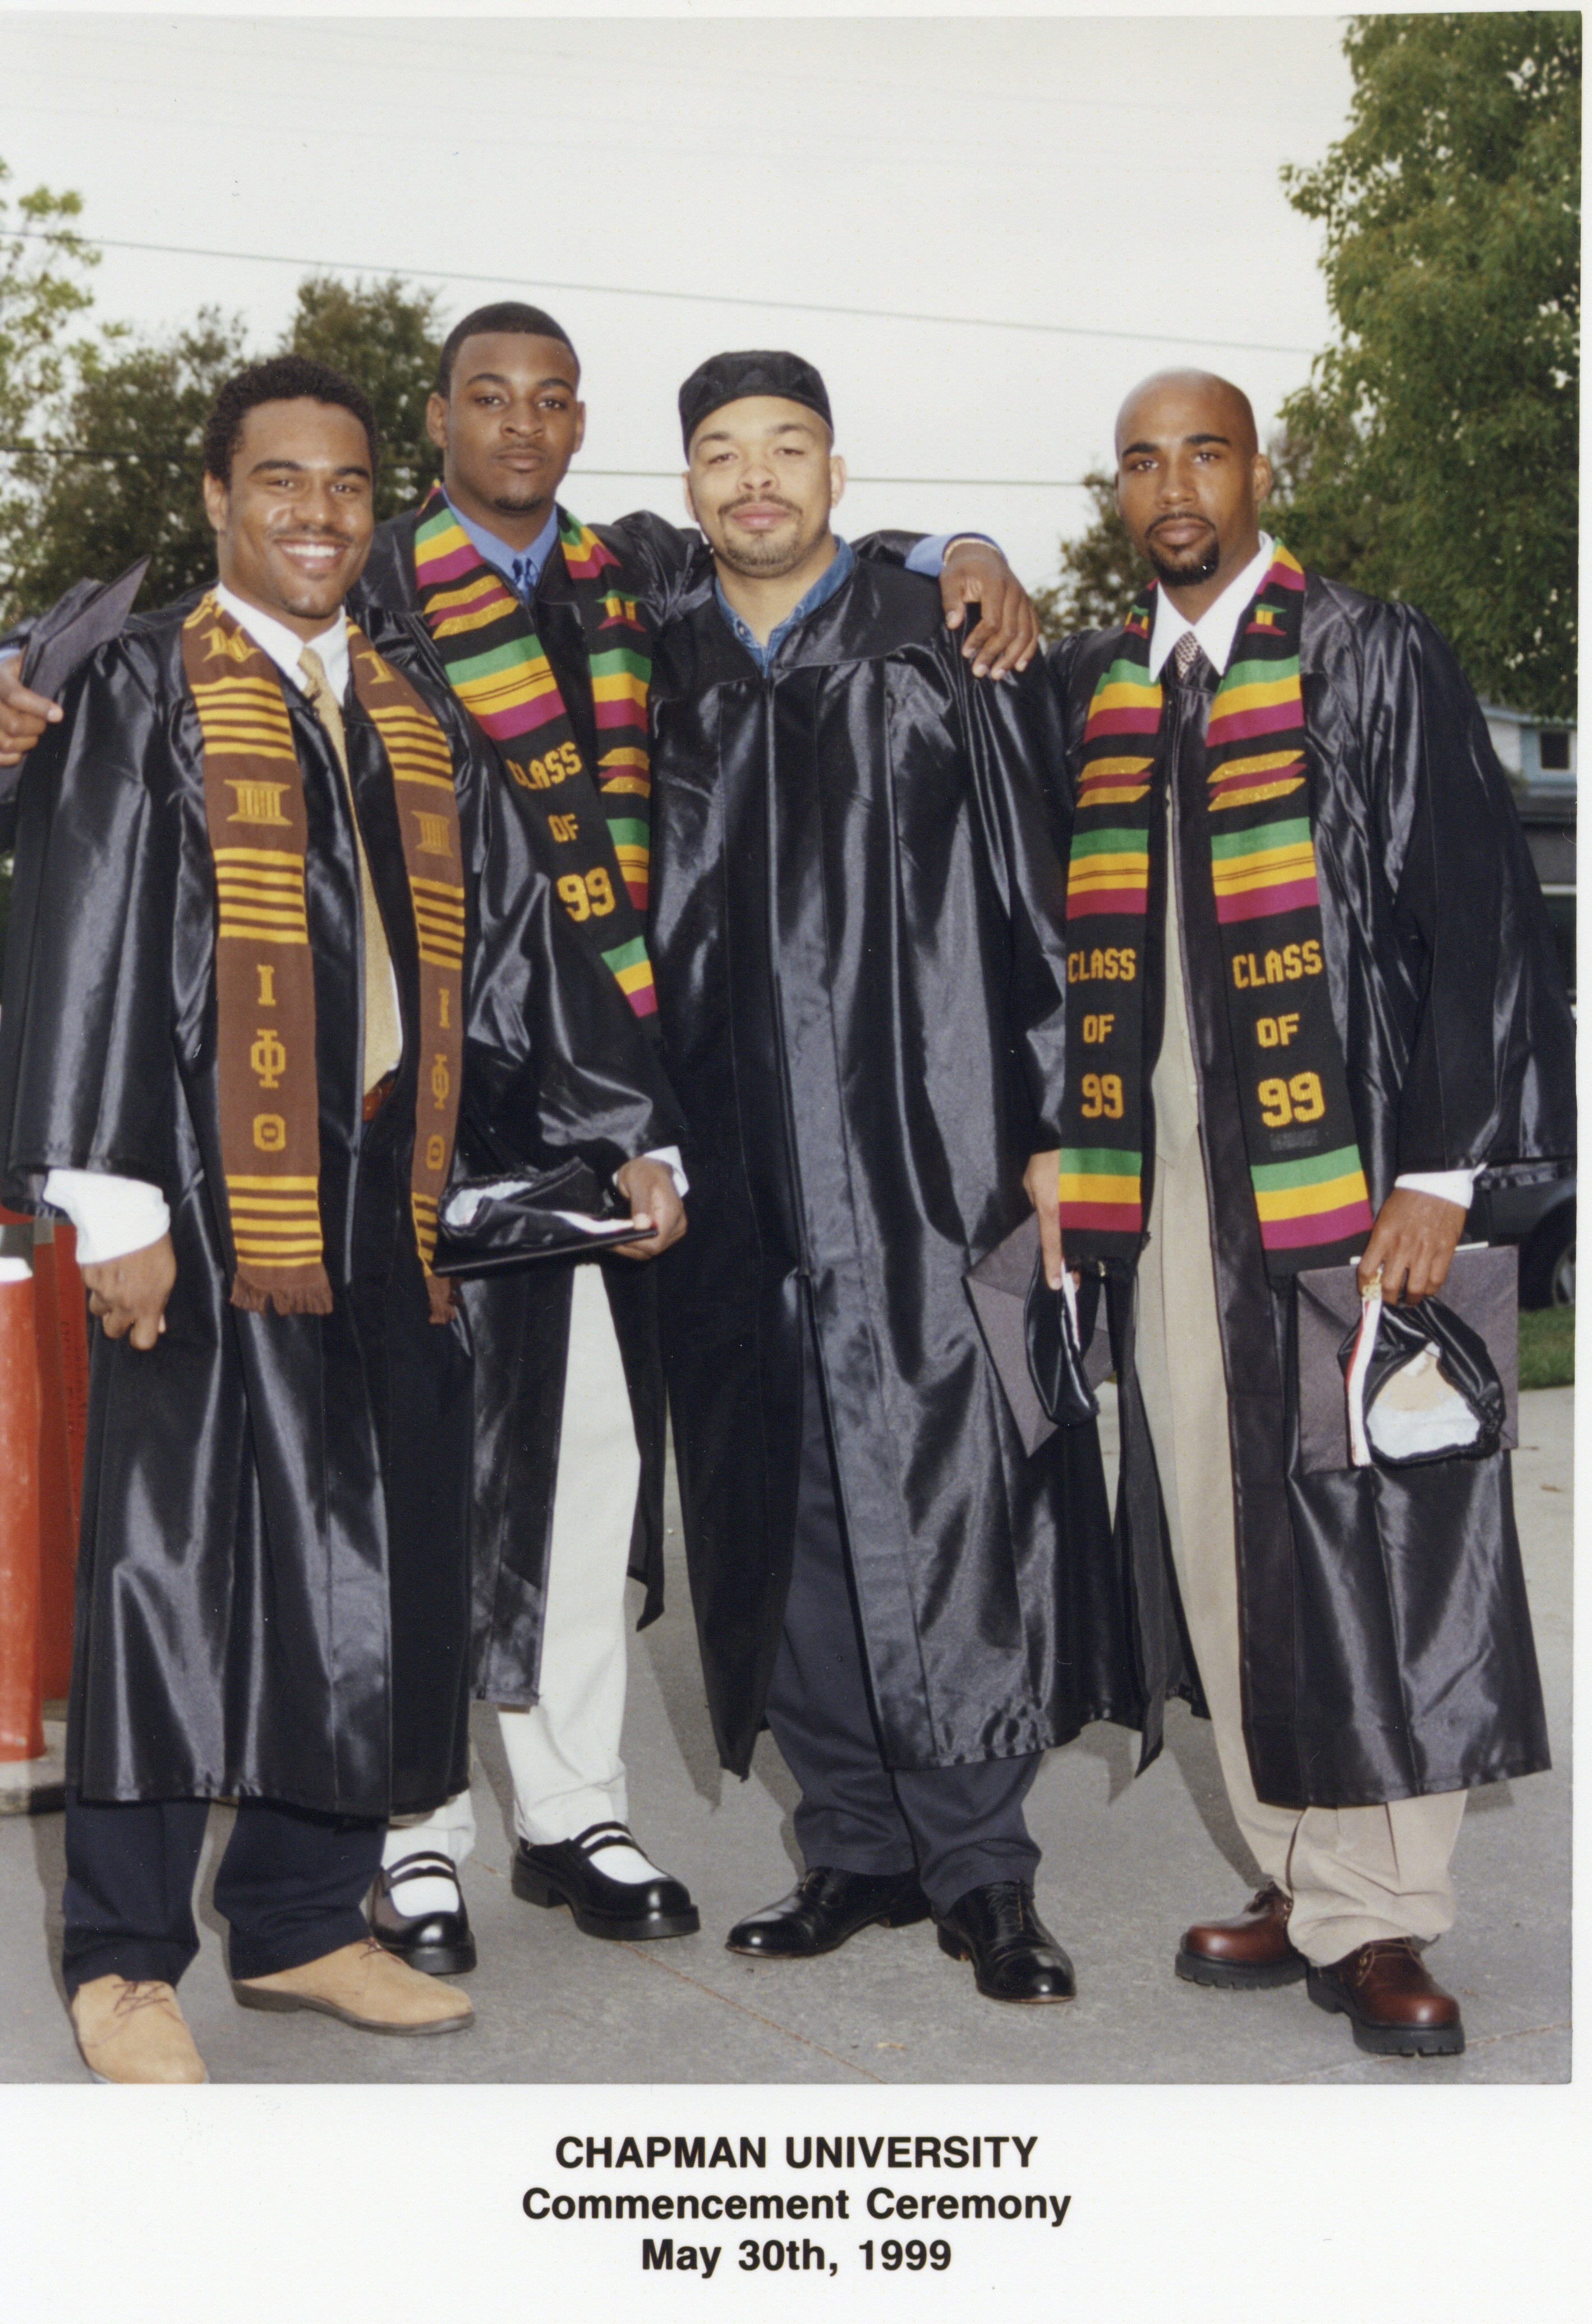 group of men in commencement gowns